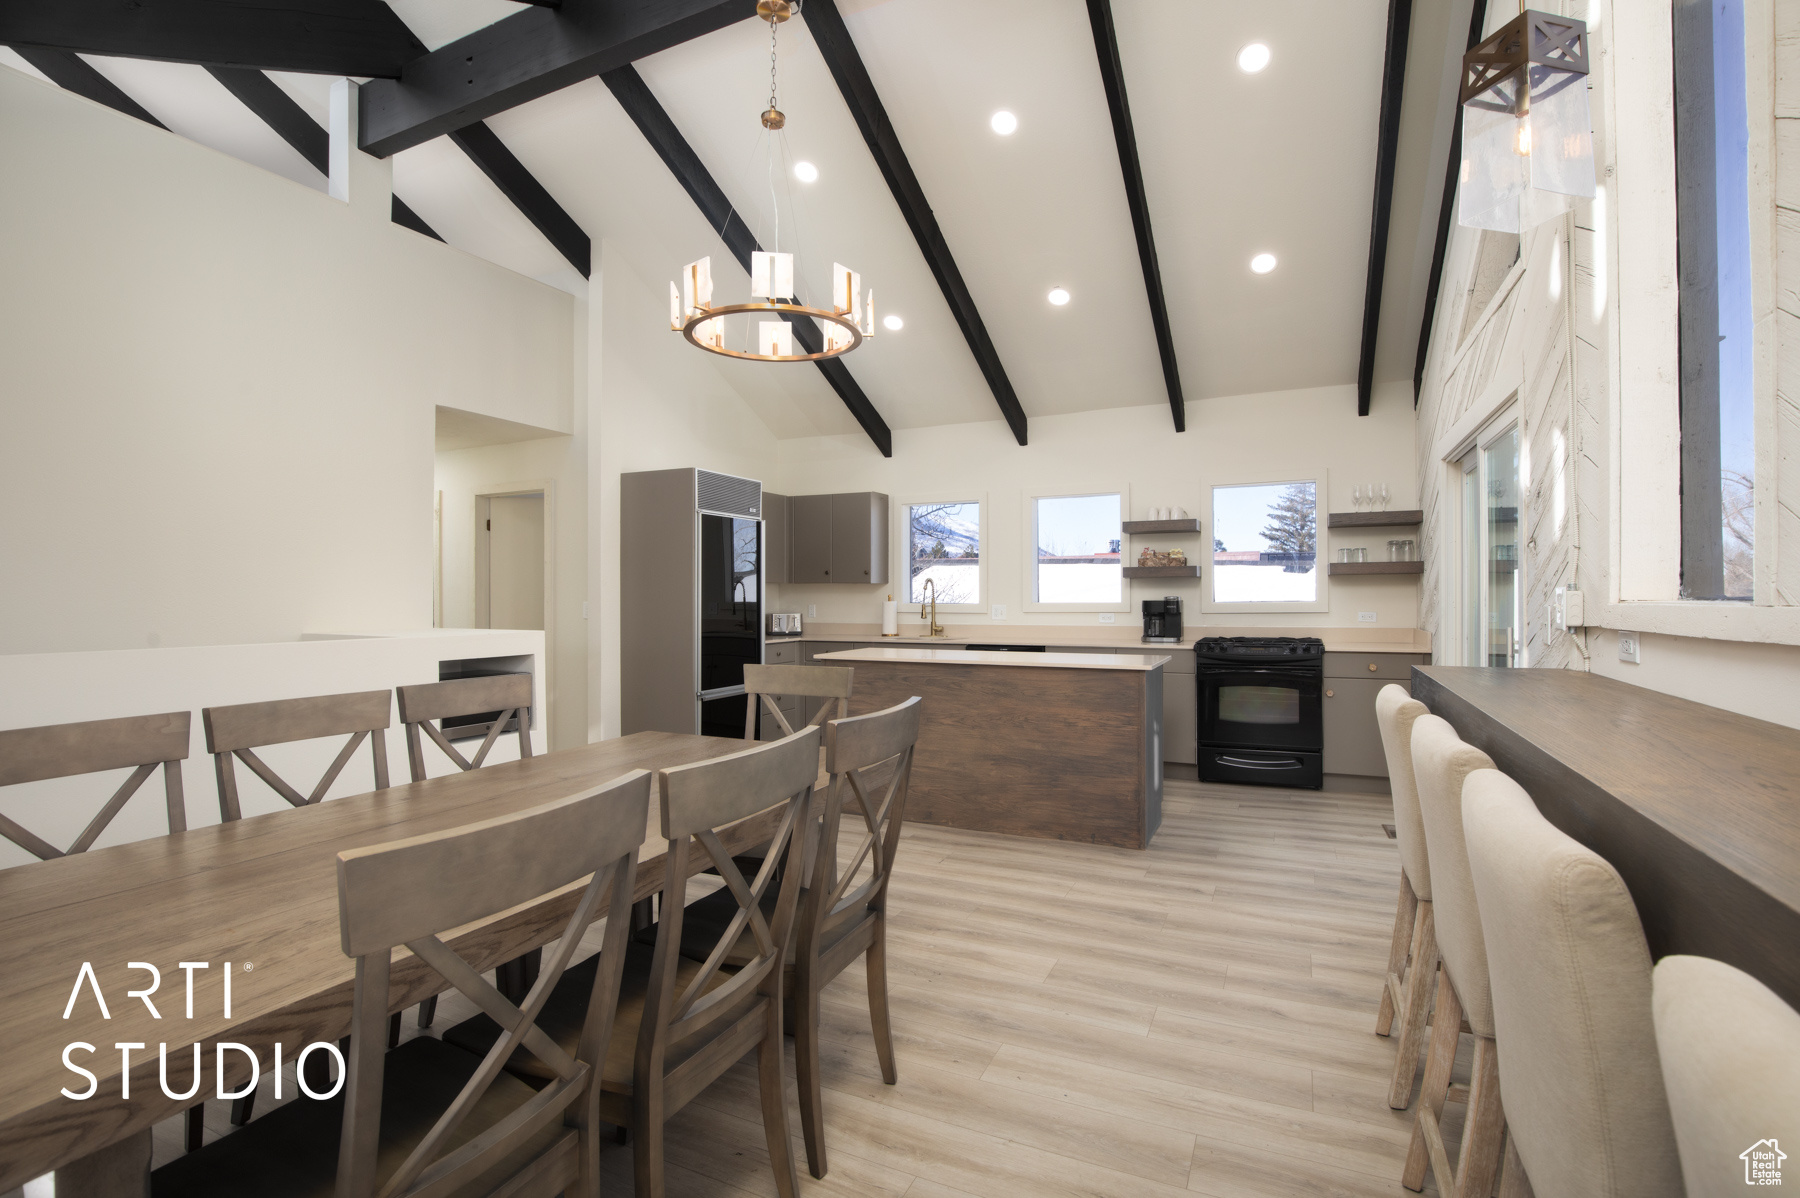 Kitchen & Dining with gray cabinets, wood-style floors, beamed ceiling, a notable chandelier, clerestory windows and lots of sunlight